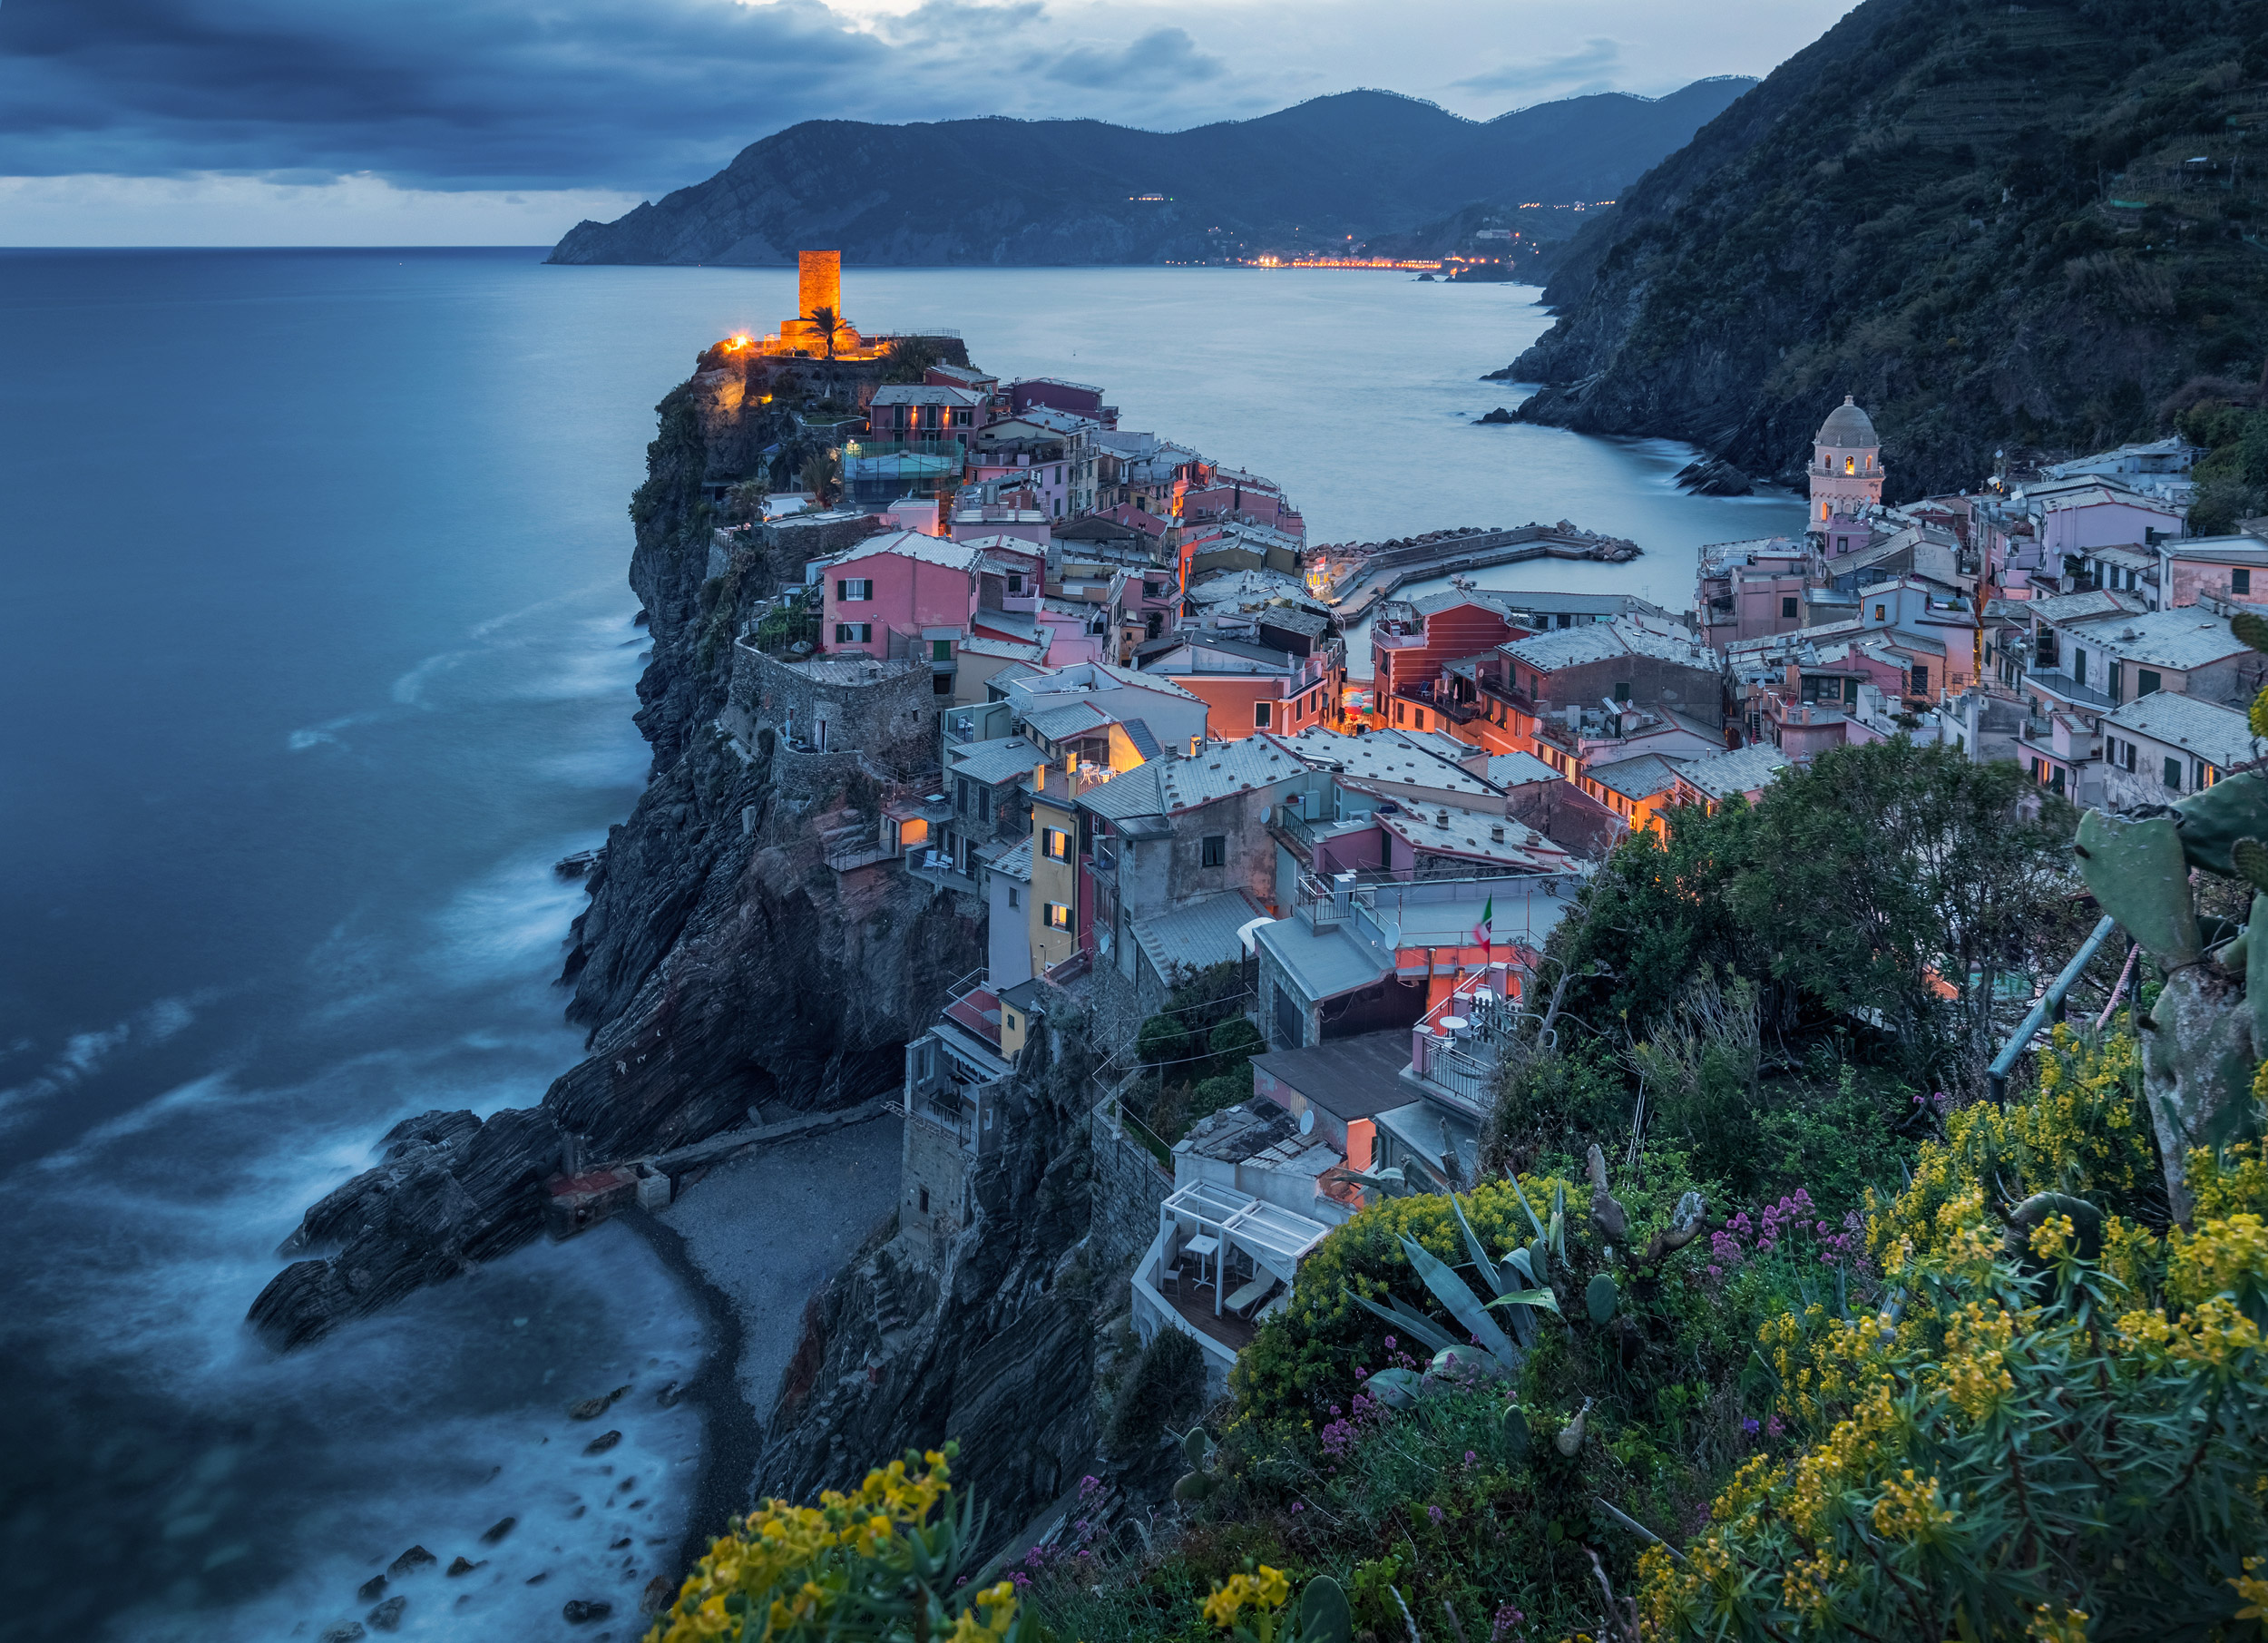 Beautiful view of Vernazza village at night, Cinque Terre, Italy